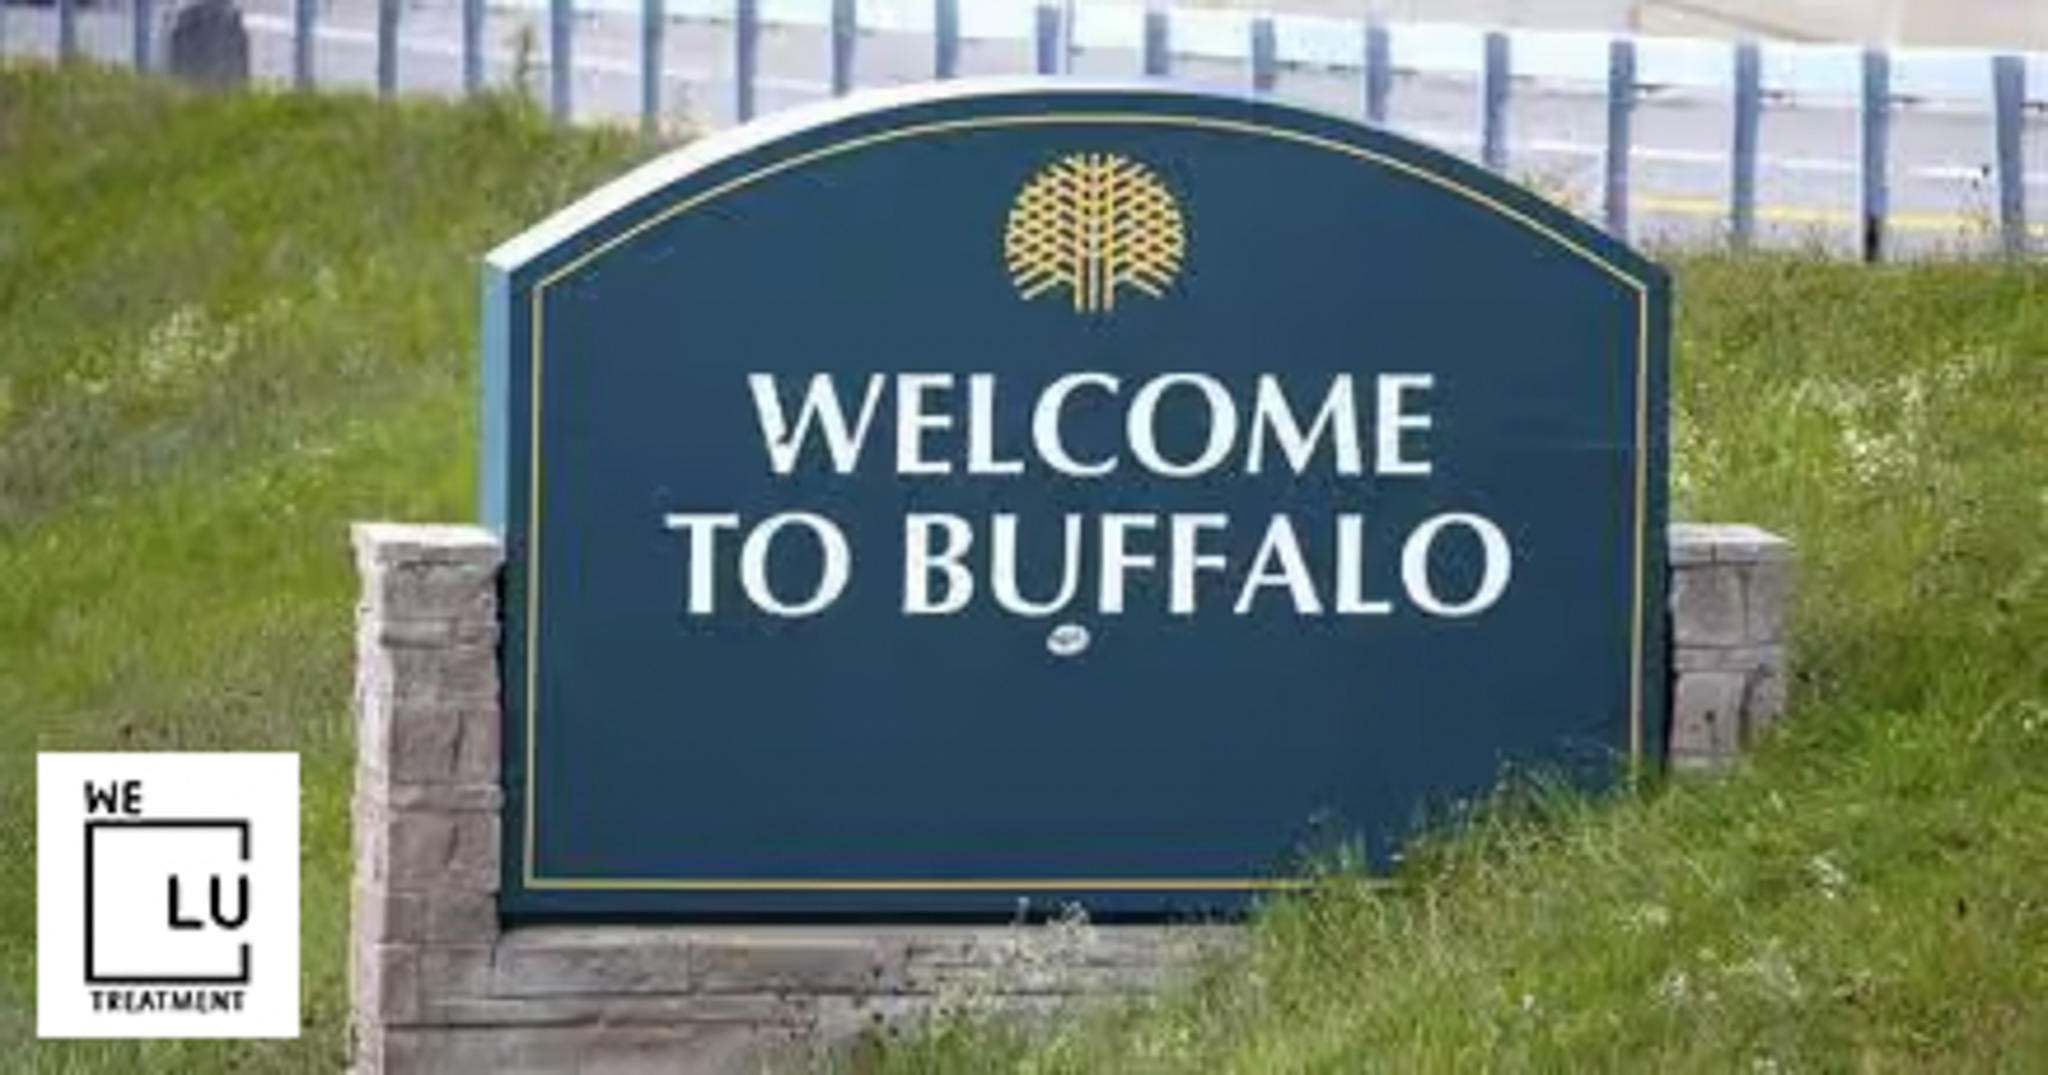 Buffalo NY We Level Up treatment center for drug and alcohol rehab detox and mental health services - Image 1